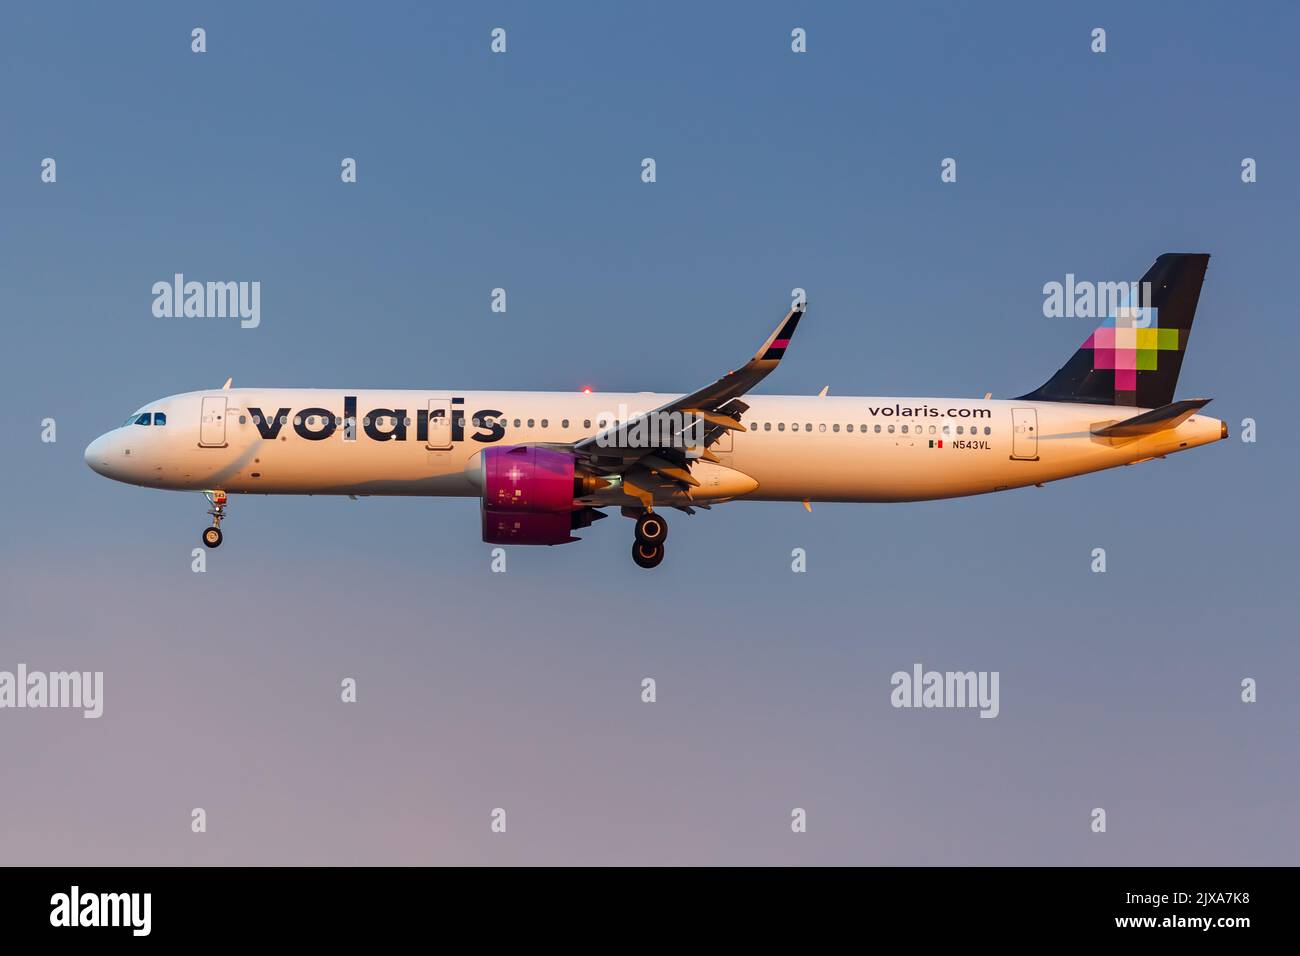 Mexico City, Mexico - April 15, 2022: Volaris Airbus A321neo airplane at Mexico City airport (MEX) in Mexico. Stock Photo